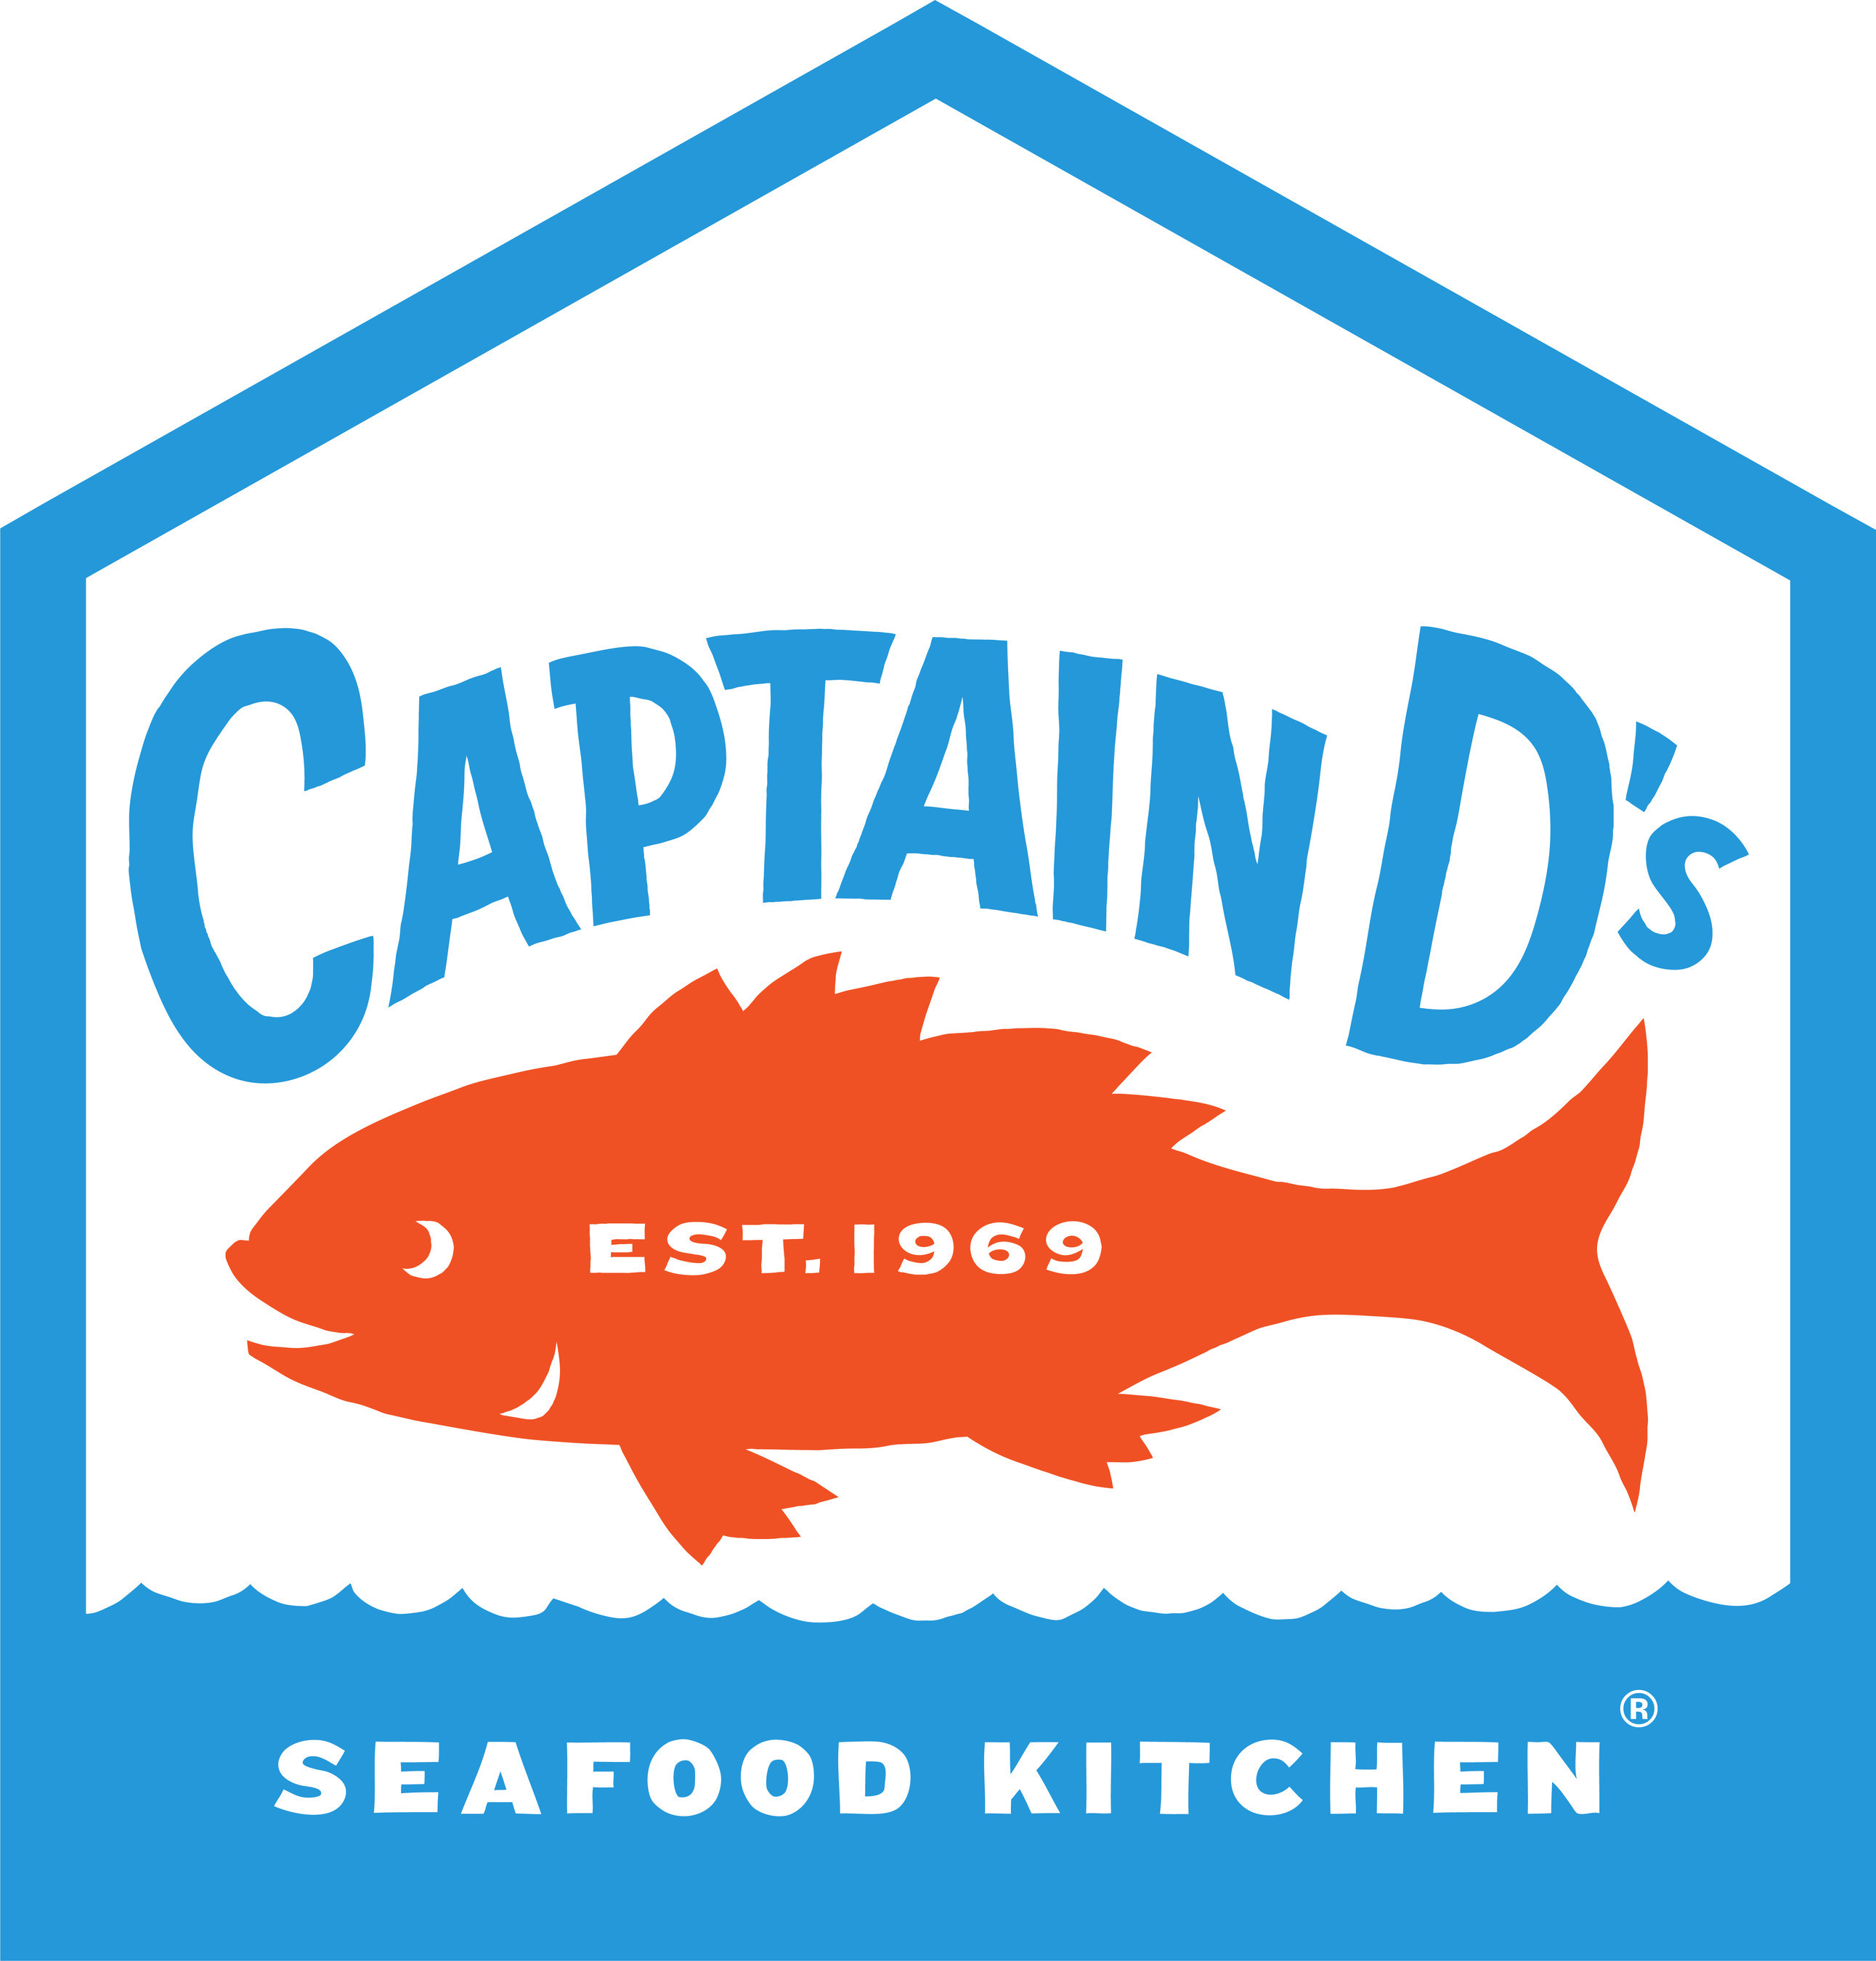 Captain D's Announces New 4.99 Full Meal Deals delicious to the